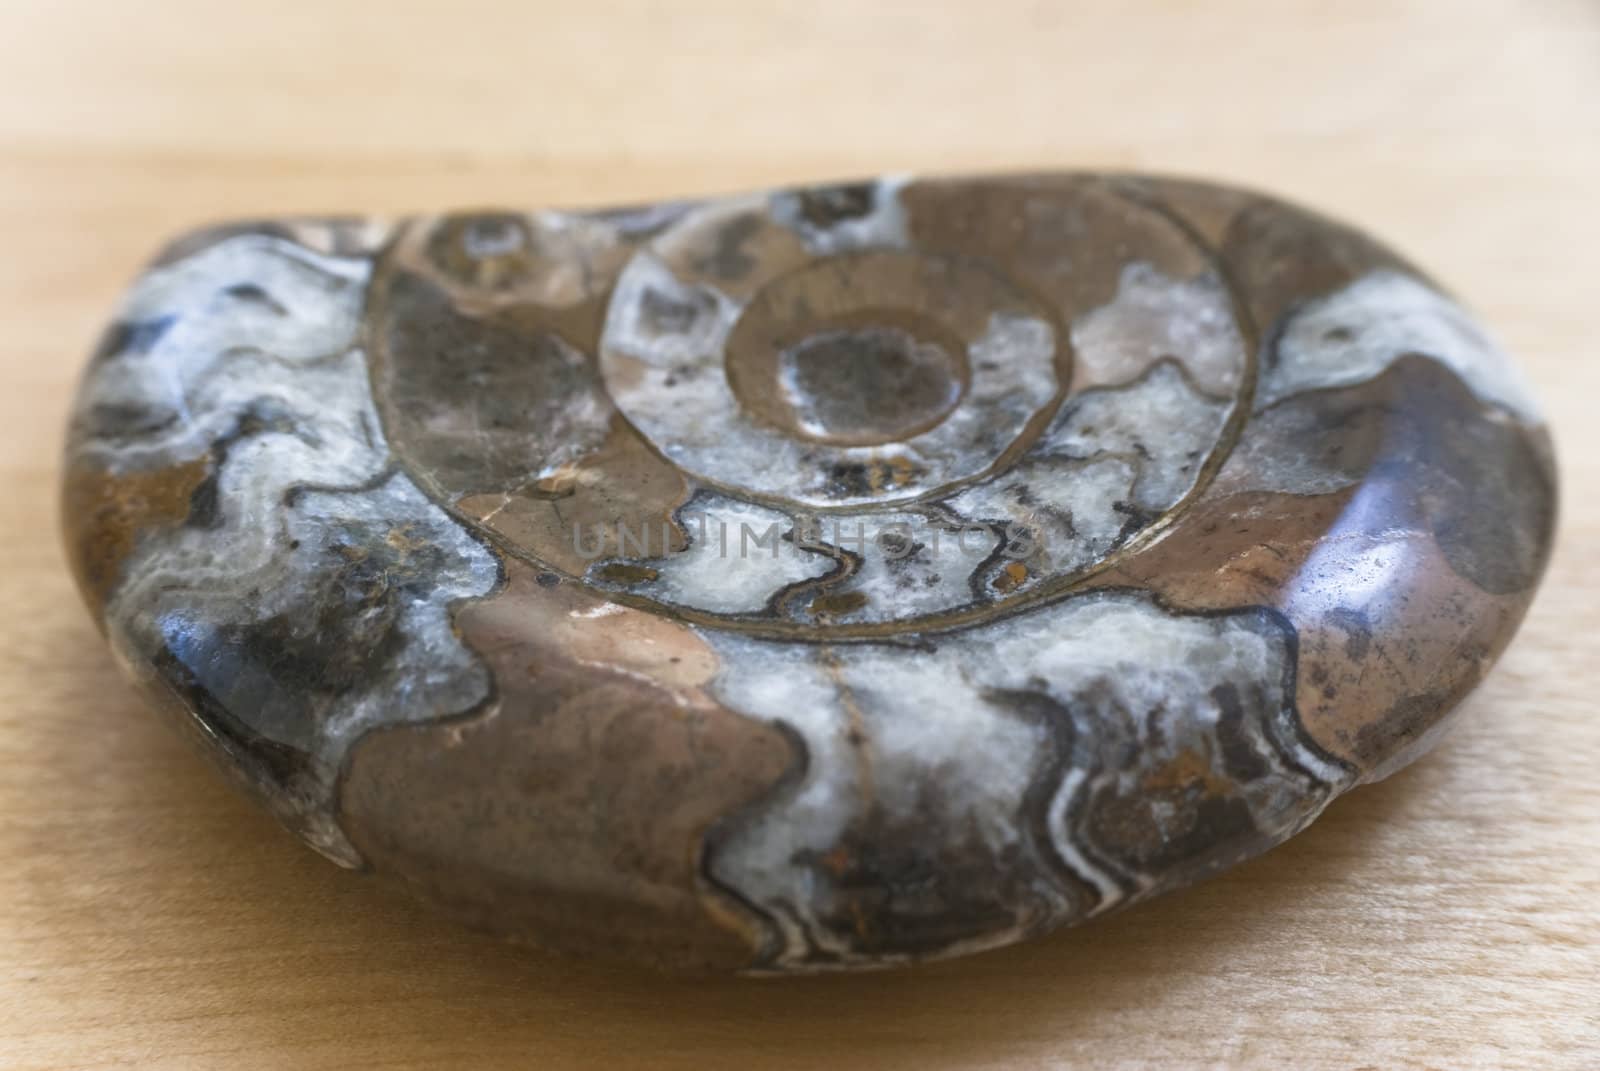 Close up of a brown, white and grey ammonite fossil, on a light wooden table.